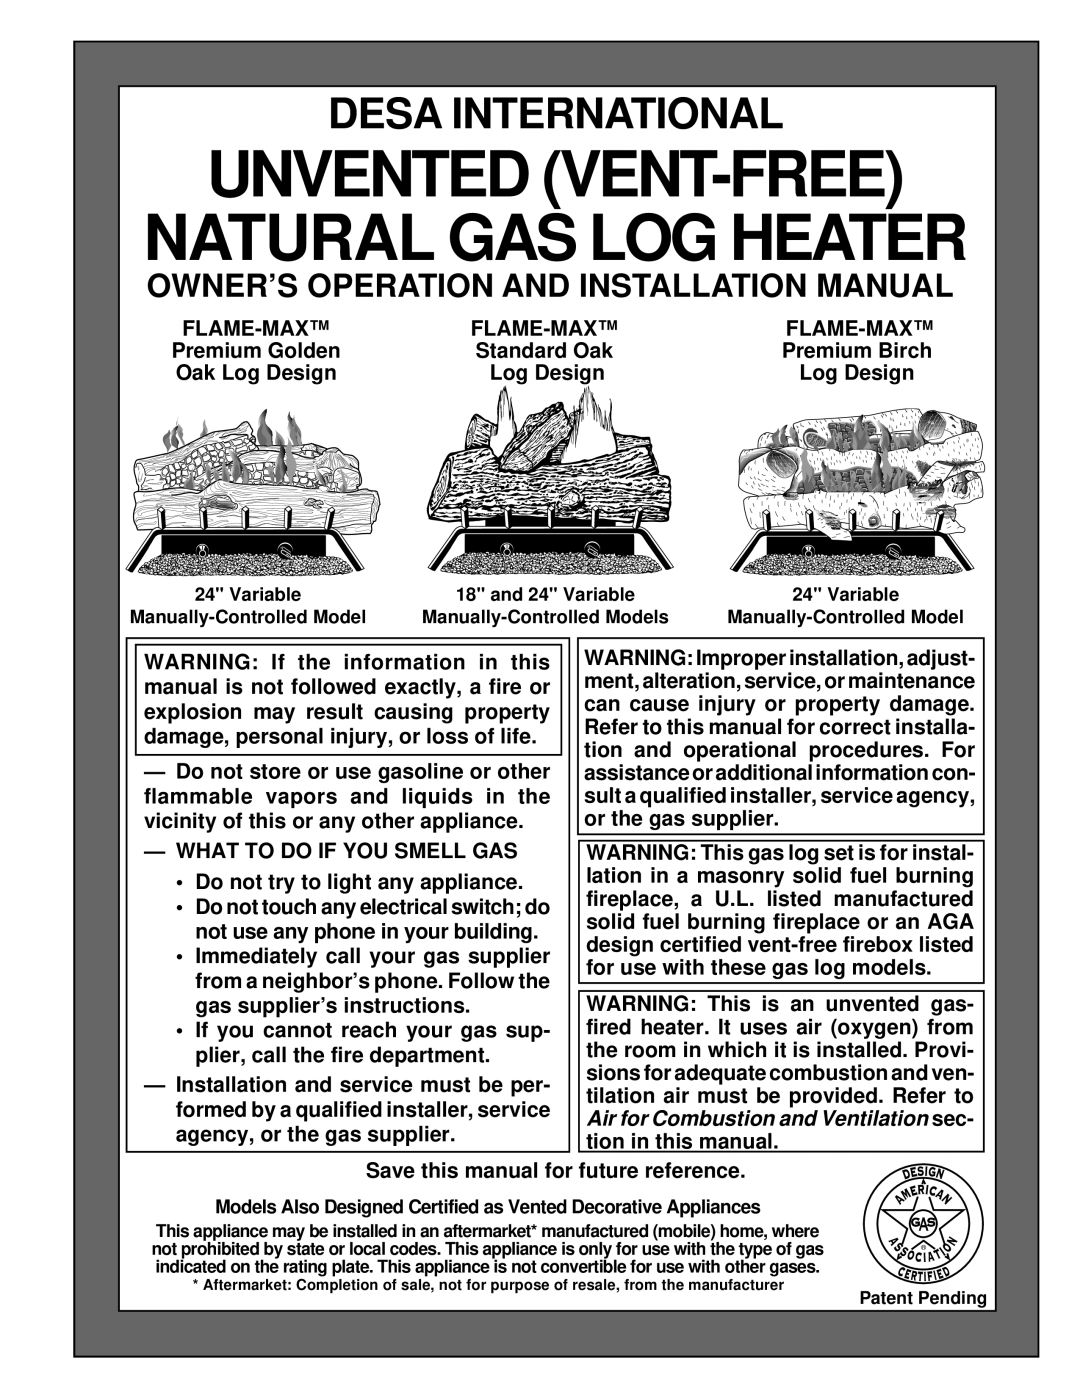 Desa UNVENTED (VENT-FREE) NATURAL GAS LOG HEATER installation manual Owner’S Operation And Installation Manual 